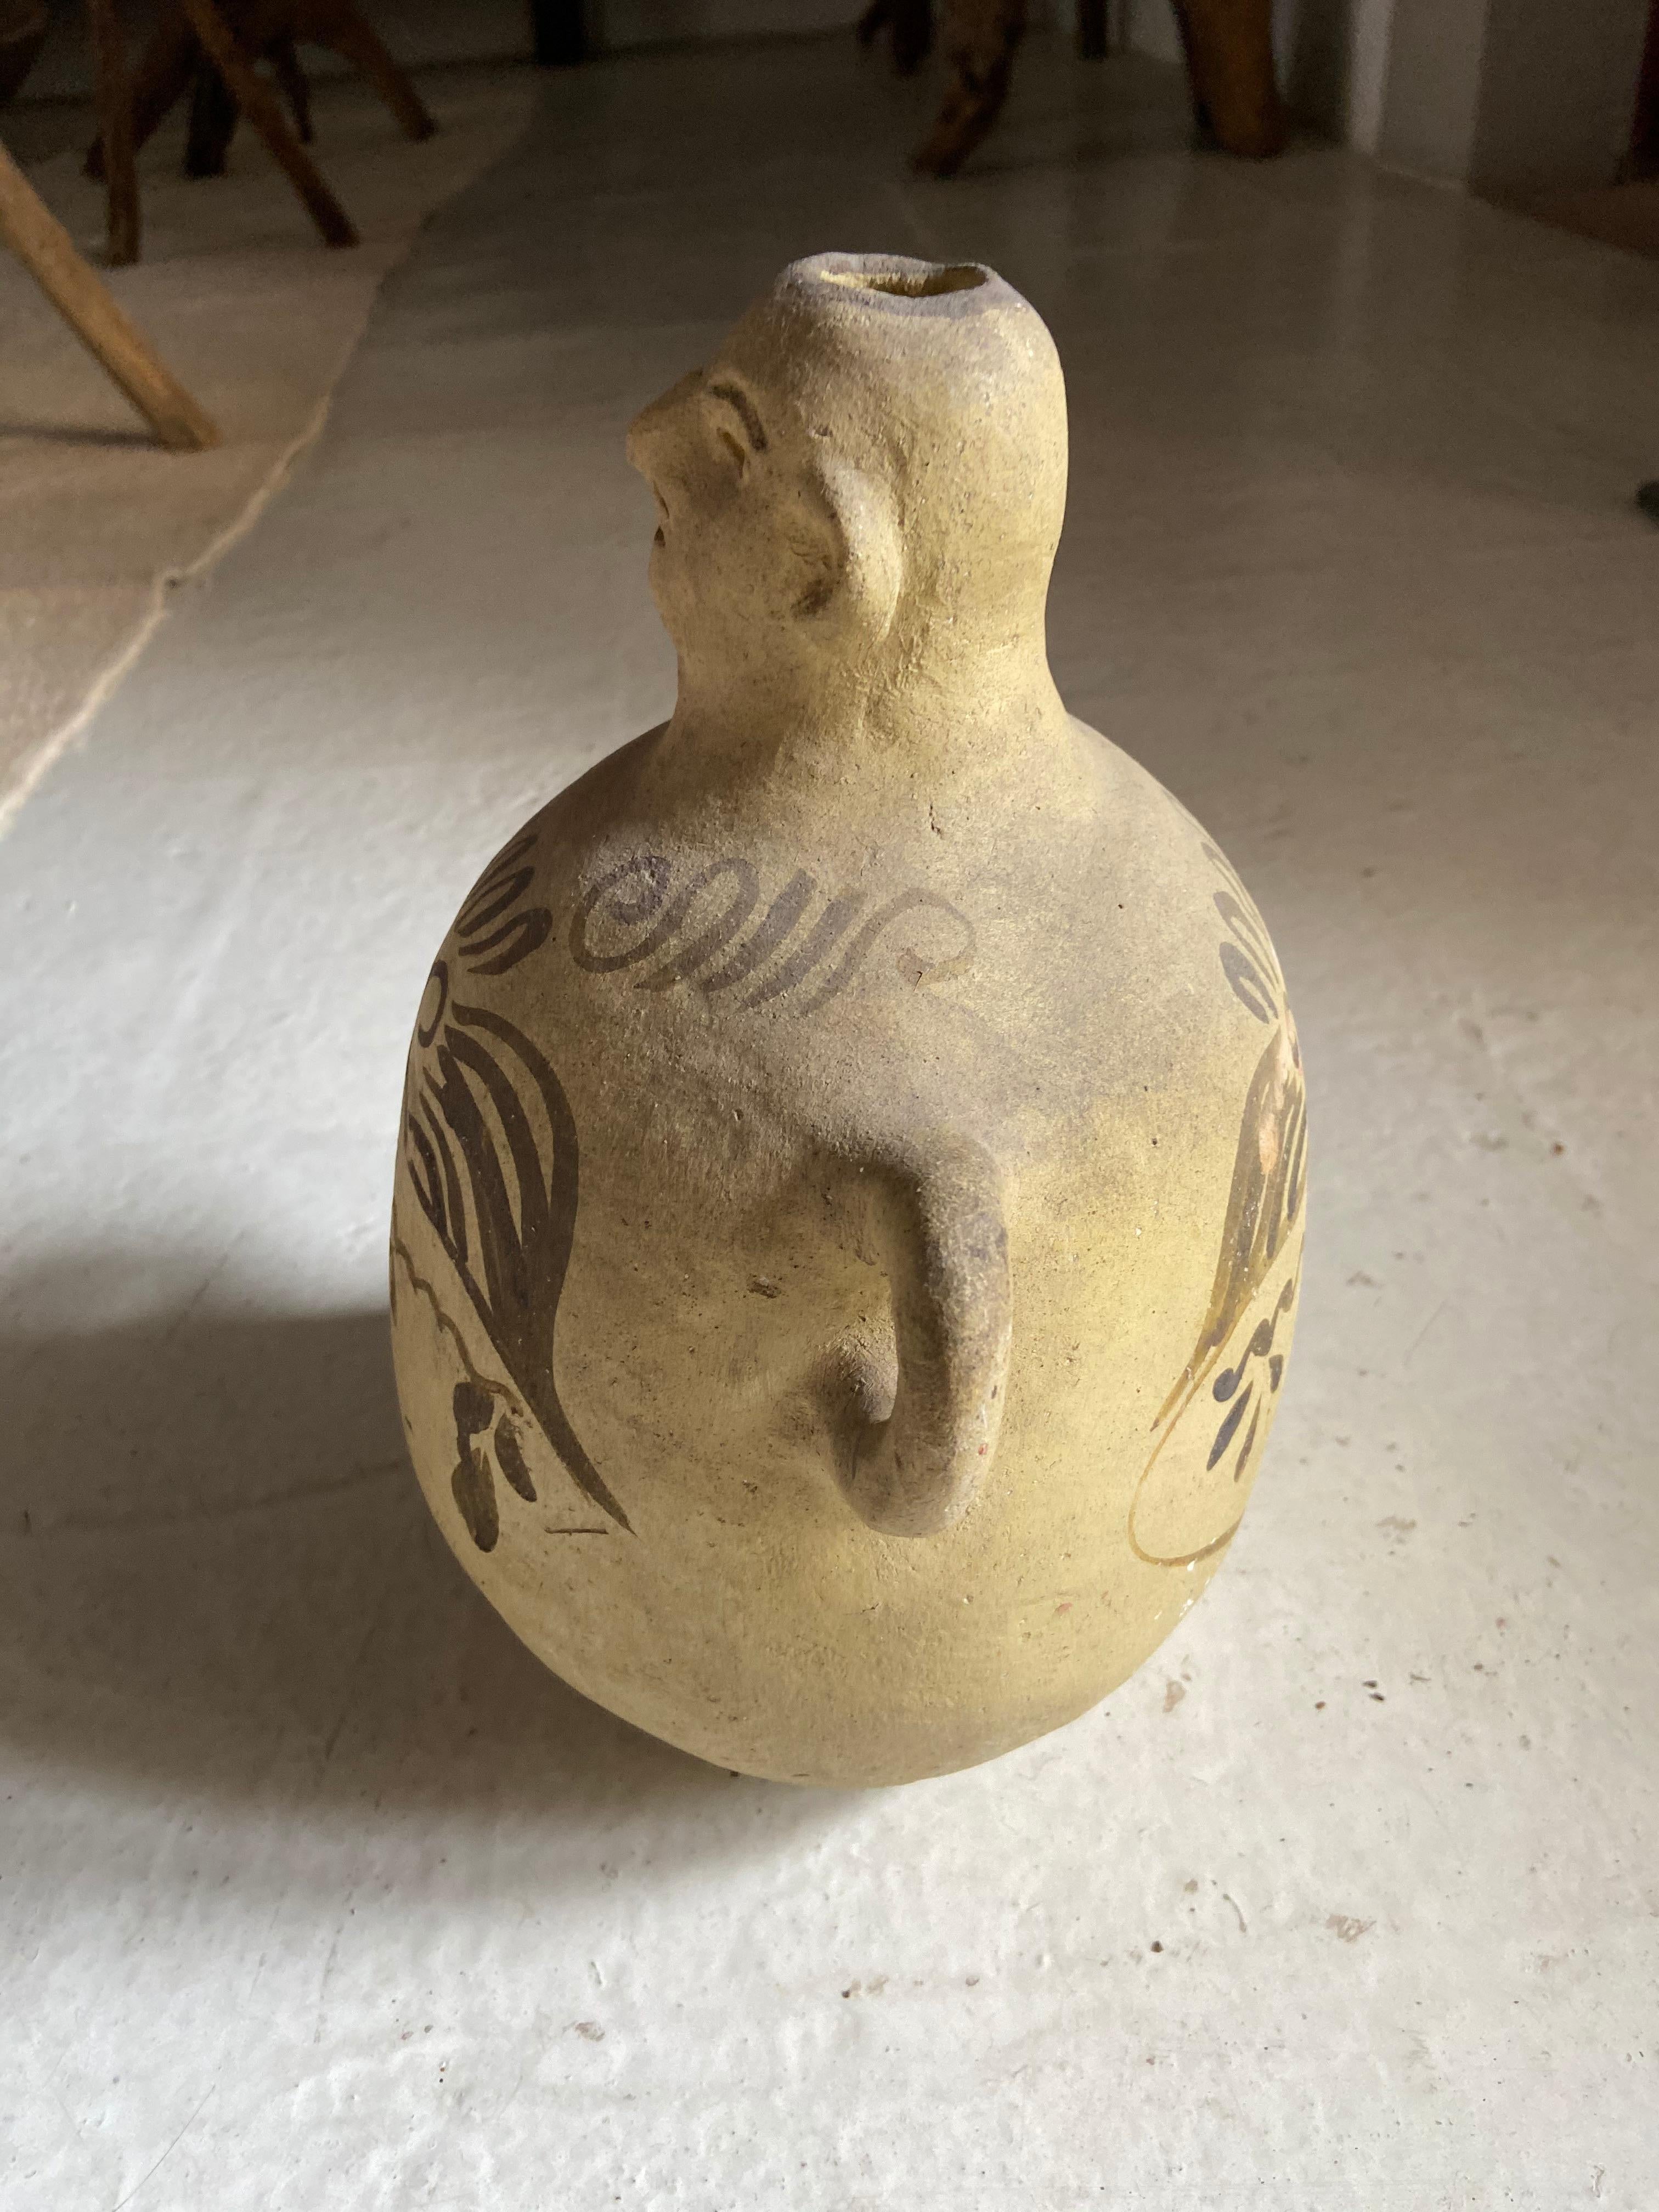 Hand made ceramic jug for carrying mezcal or pulque from Tuliman, Guerrero, circa 1970s. Canteen-type jug with hoop arms used for rope or strap ties. A cork or stopper would typically be placed on the vessel's head.